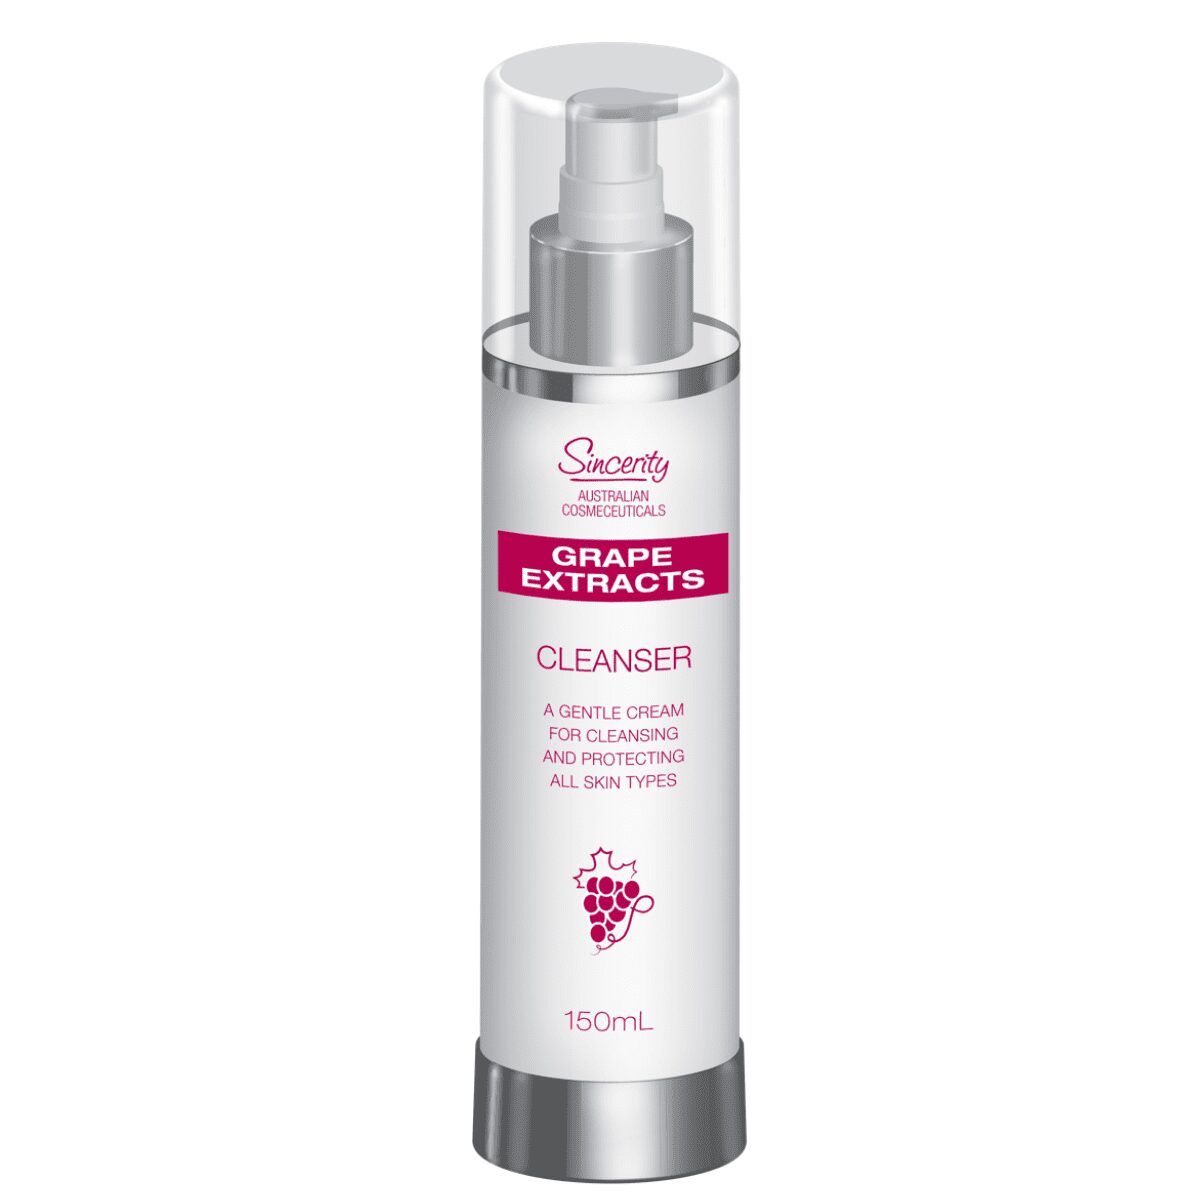 Grape Extracts AntiAgeing Cleanser